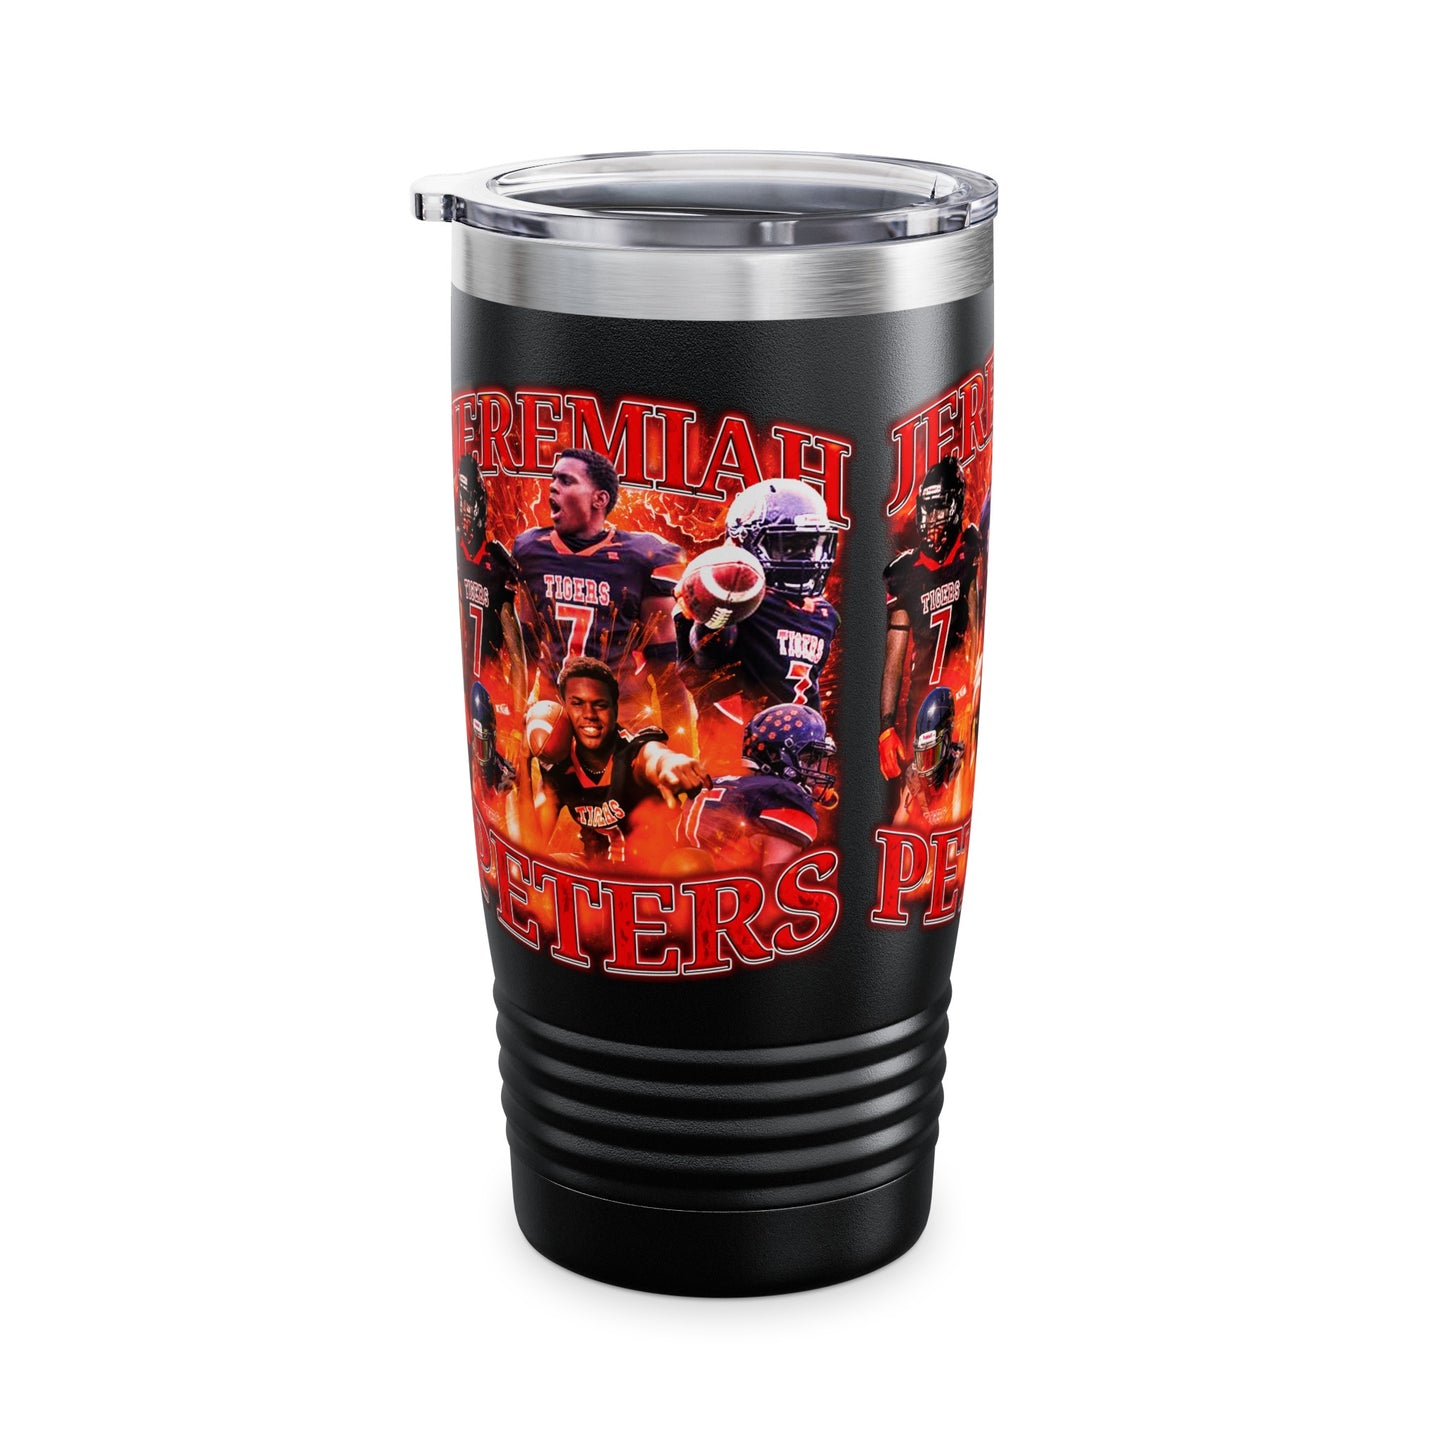 Jeremiah Peters Stainless Steal Tumbler